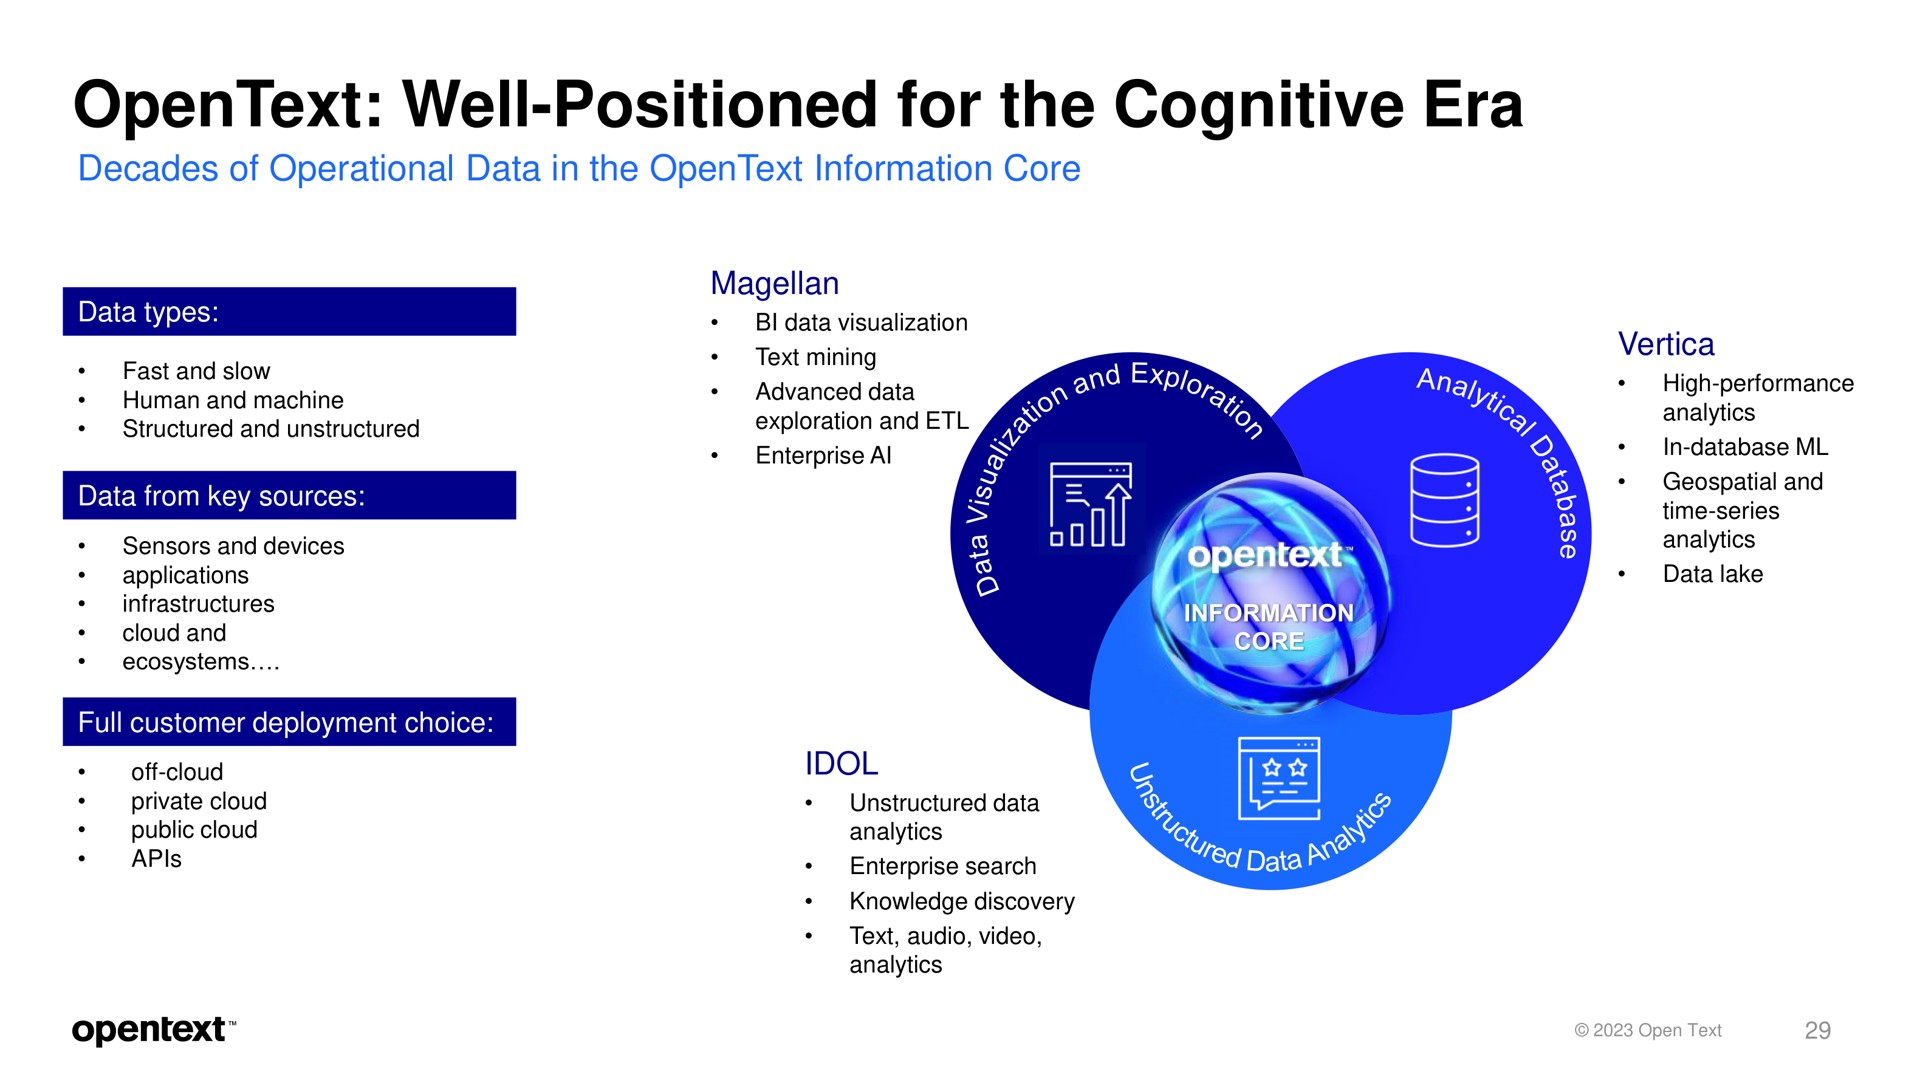 well positioned for the cognitive era | OpenText